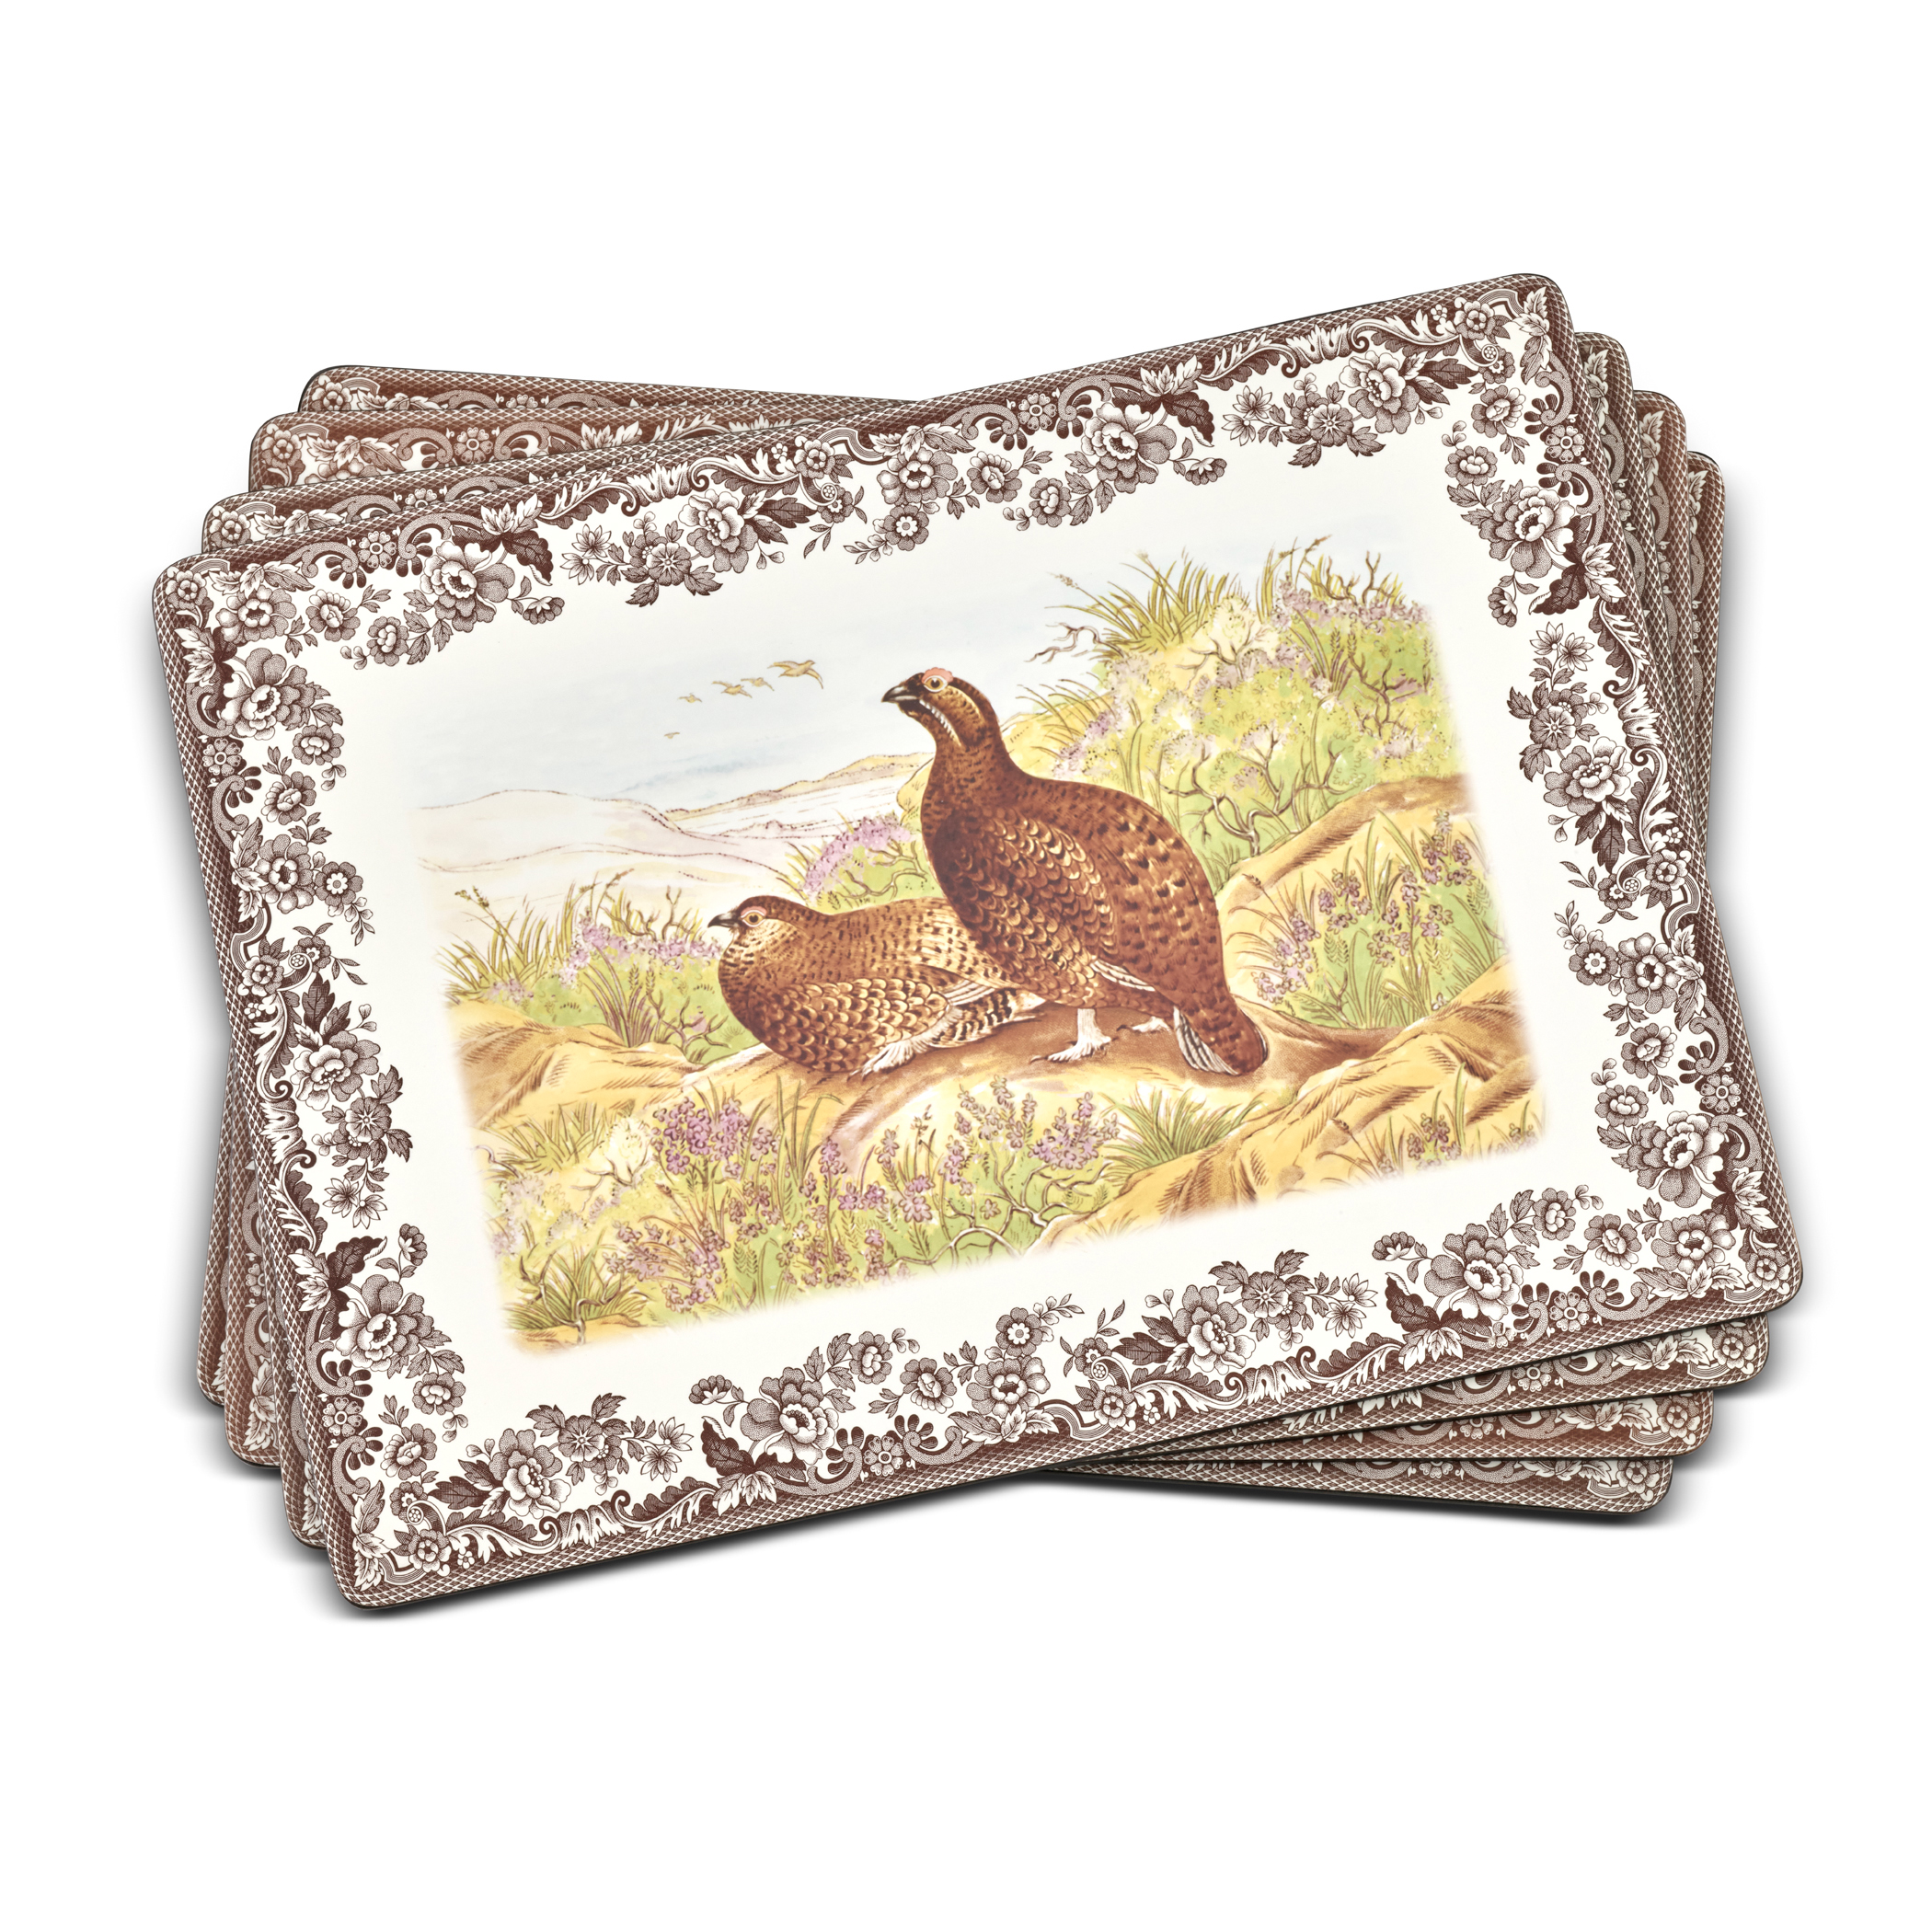 4x Country Life Phesant Dinner Placemats & Coasters Table Setting Cork Backed